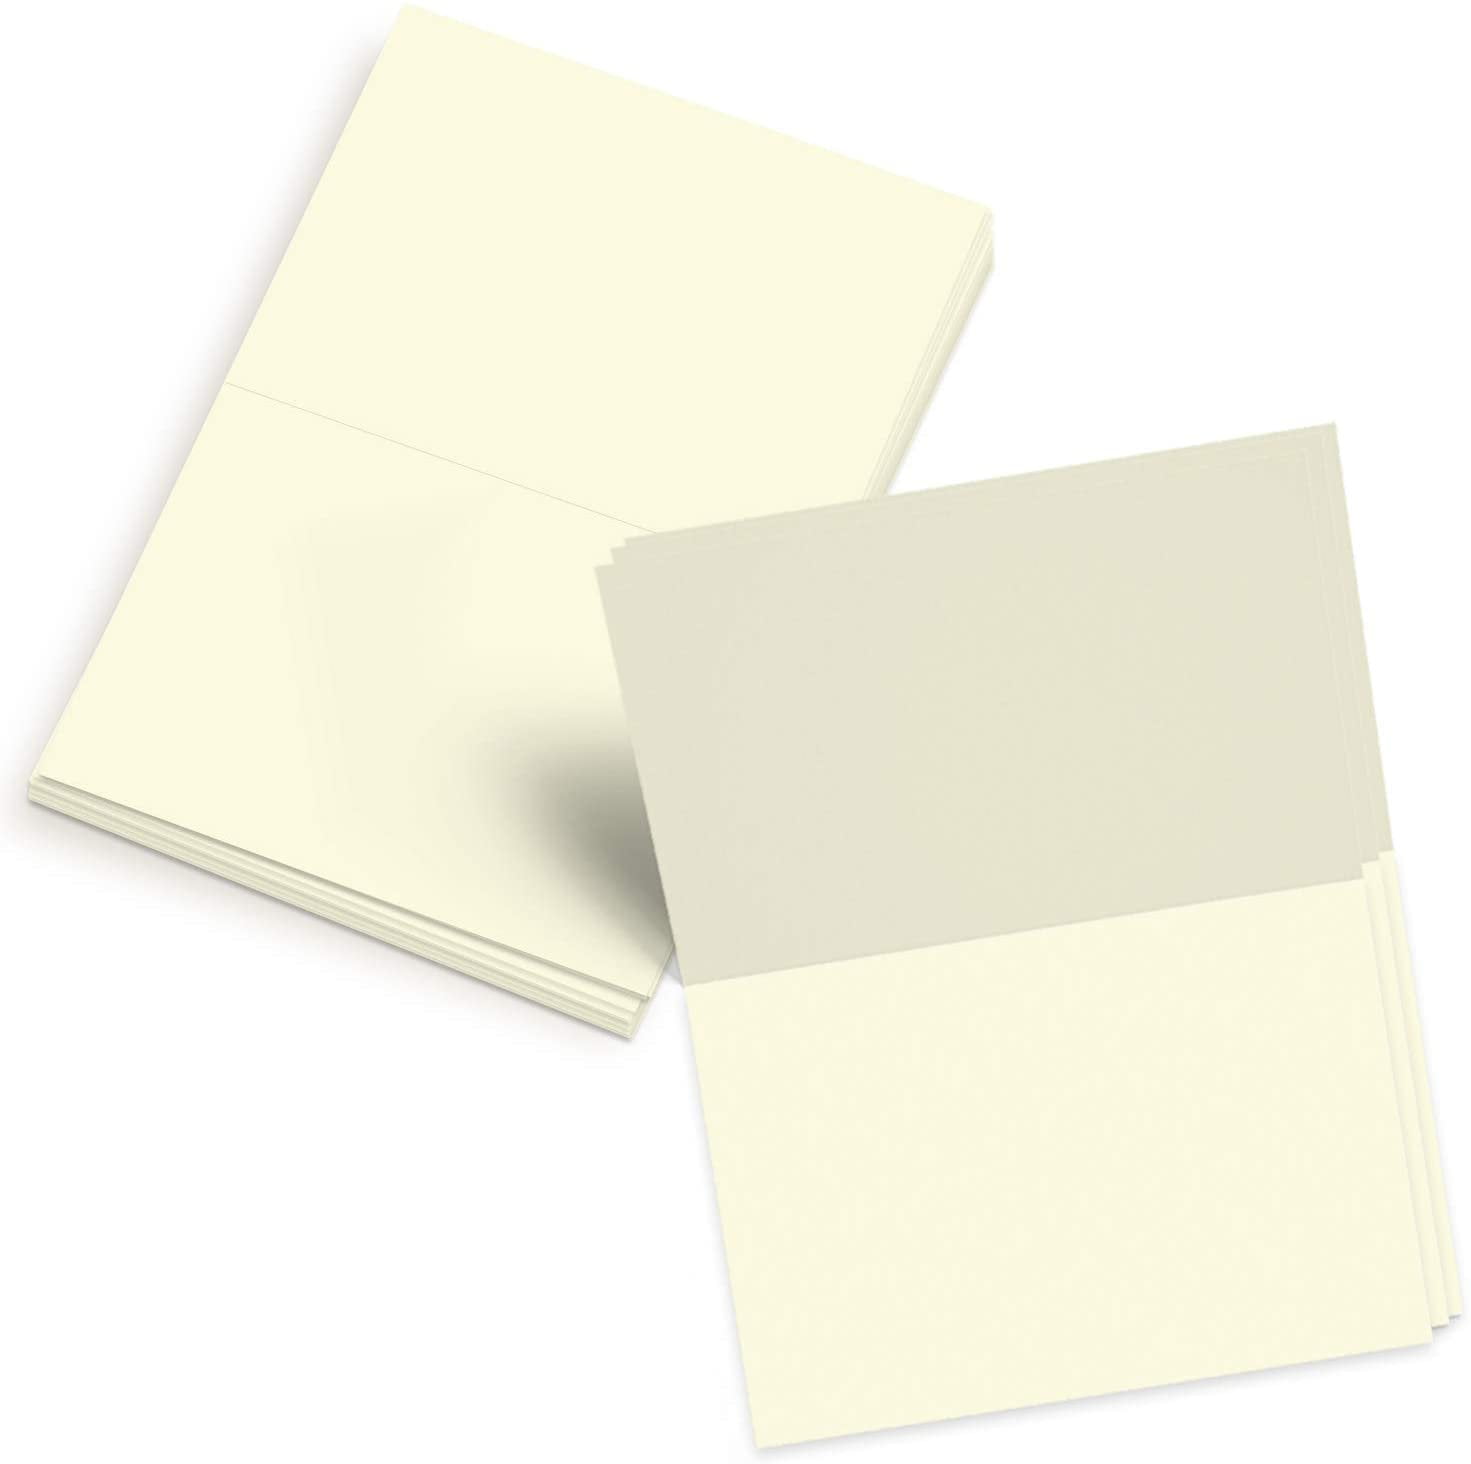 Blank 5 X 7 Greeting Cards and Envelopes - Ivory/Cream - Heavyweight 80lb  Cover Paper - Inkjet/Laser Printer Compatible - For Making Invitations